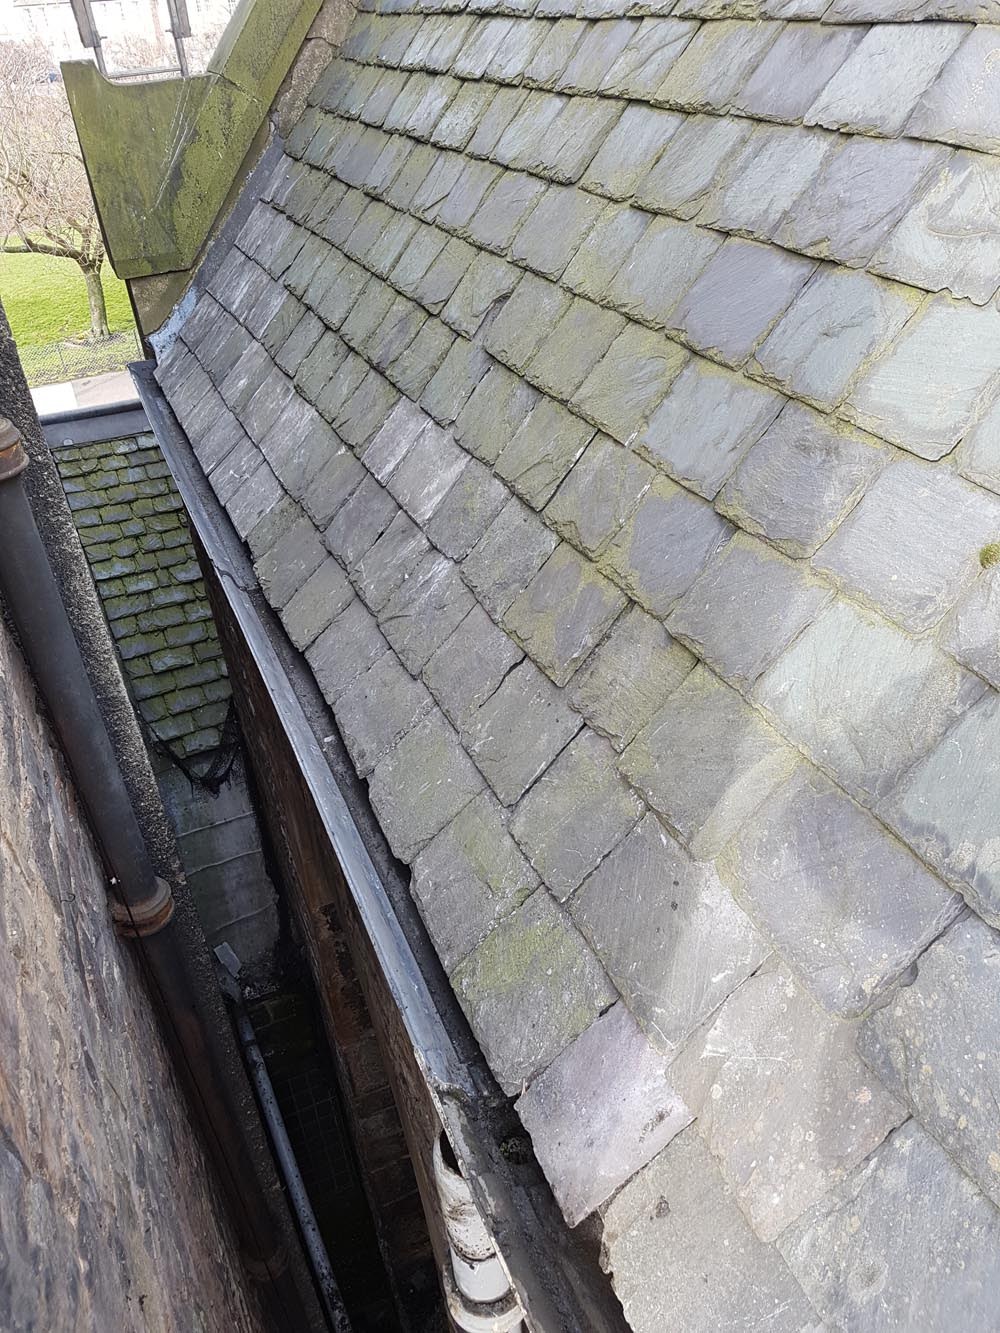 Looking along the newly fitted gutters with all the slates patched back in